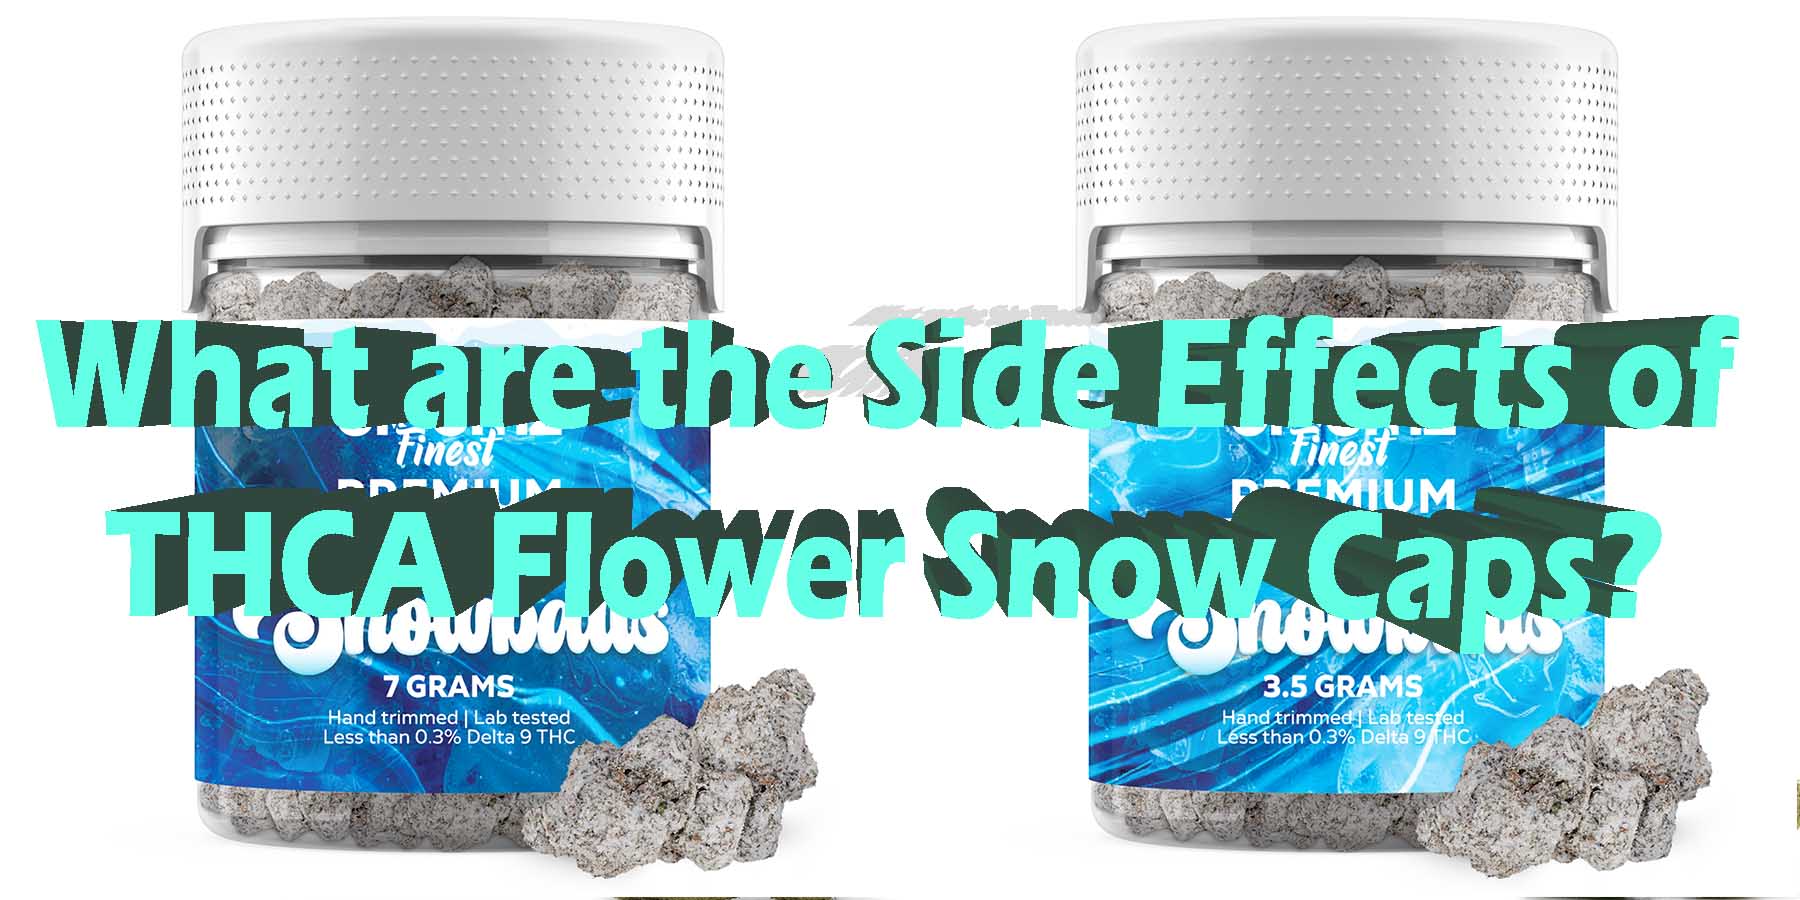 What are the Side Effects of THCA Flower Snow Caps Better LowestPrice Coupon Discount For Smoking Best High Smoke THCA THC Cannabinoids Shop Online Near Me Bloomz